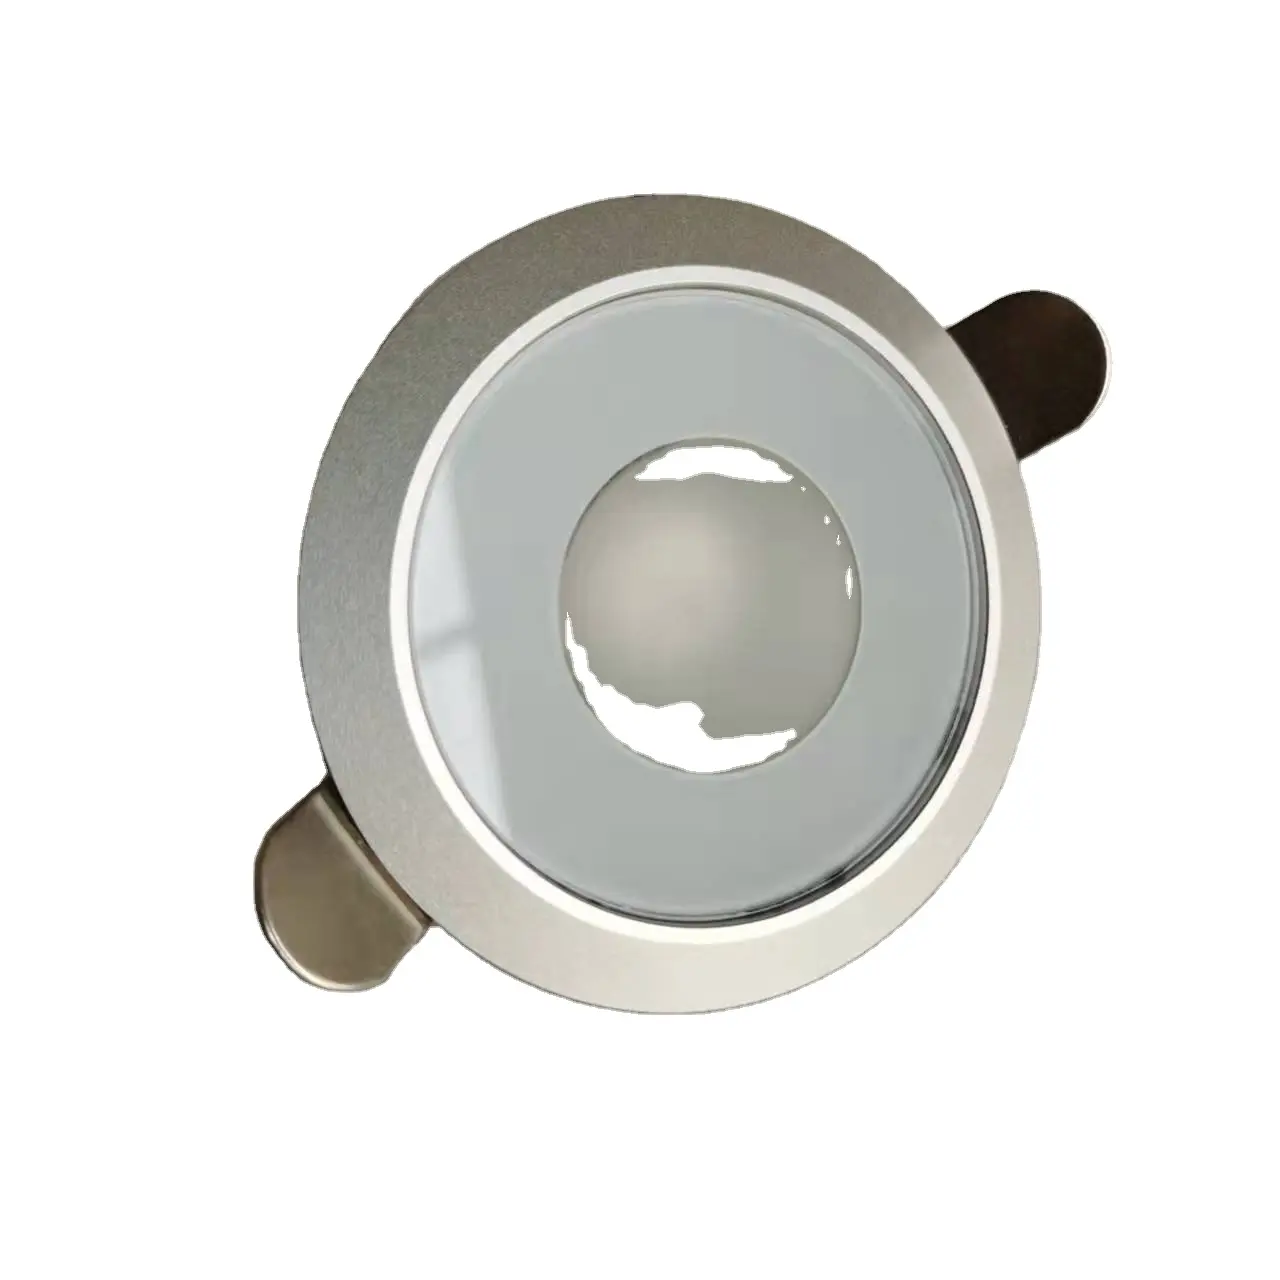 Waterproof exterior use Led Down Light with glass lens for Boat Marine Yacht Accessories courtesy lighting